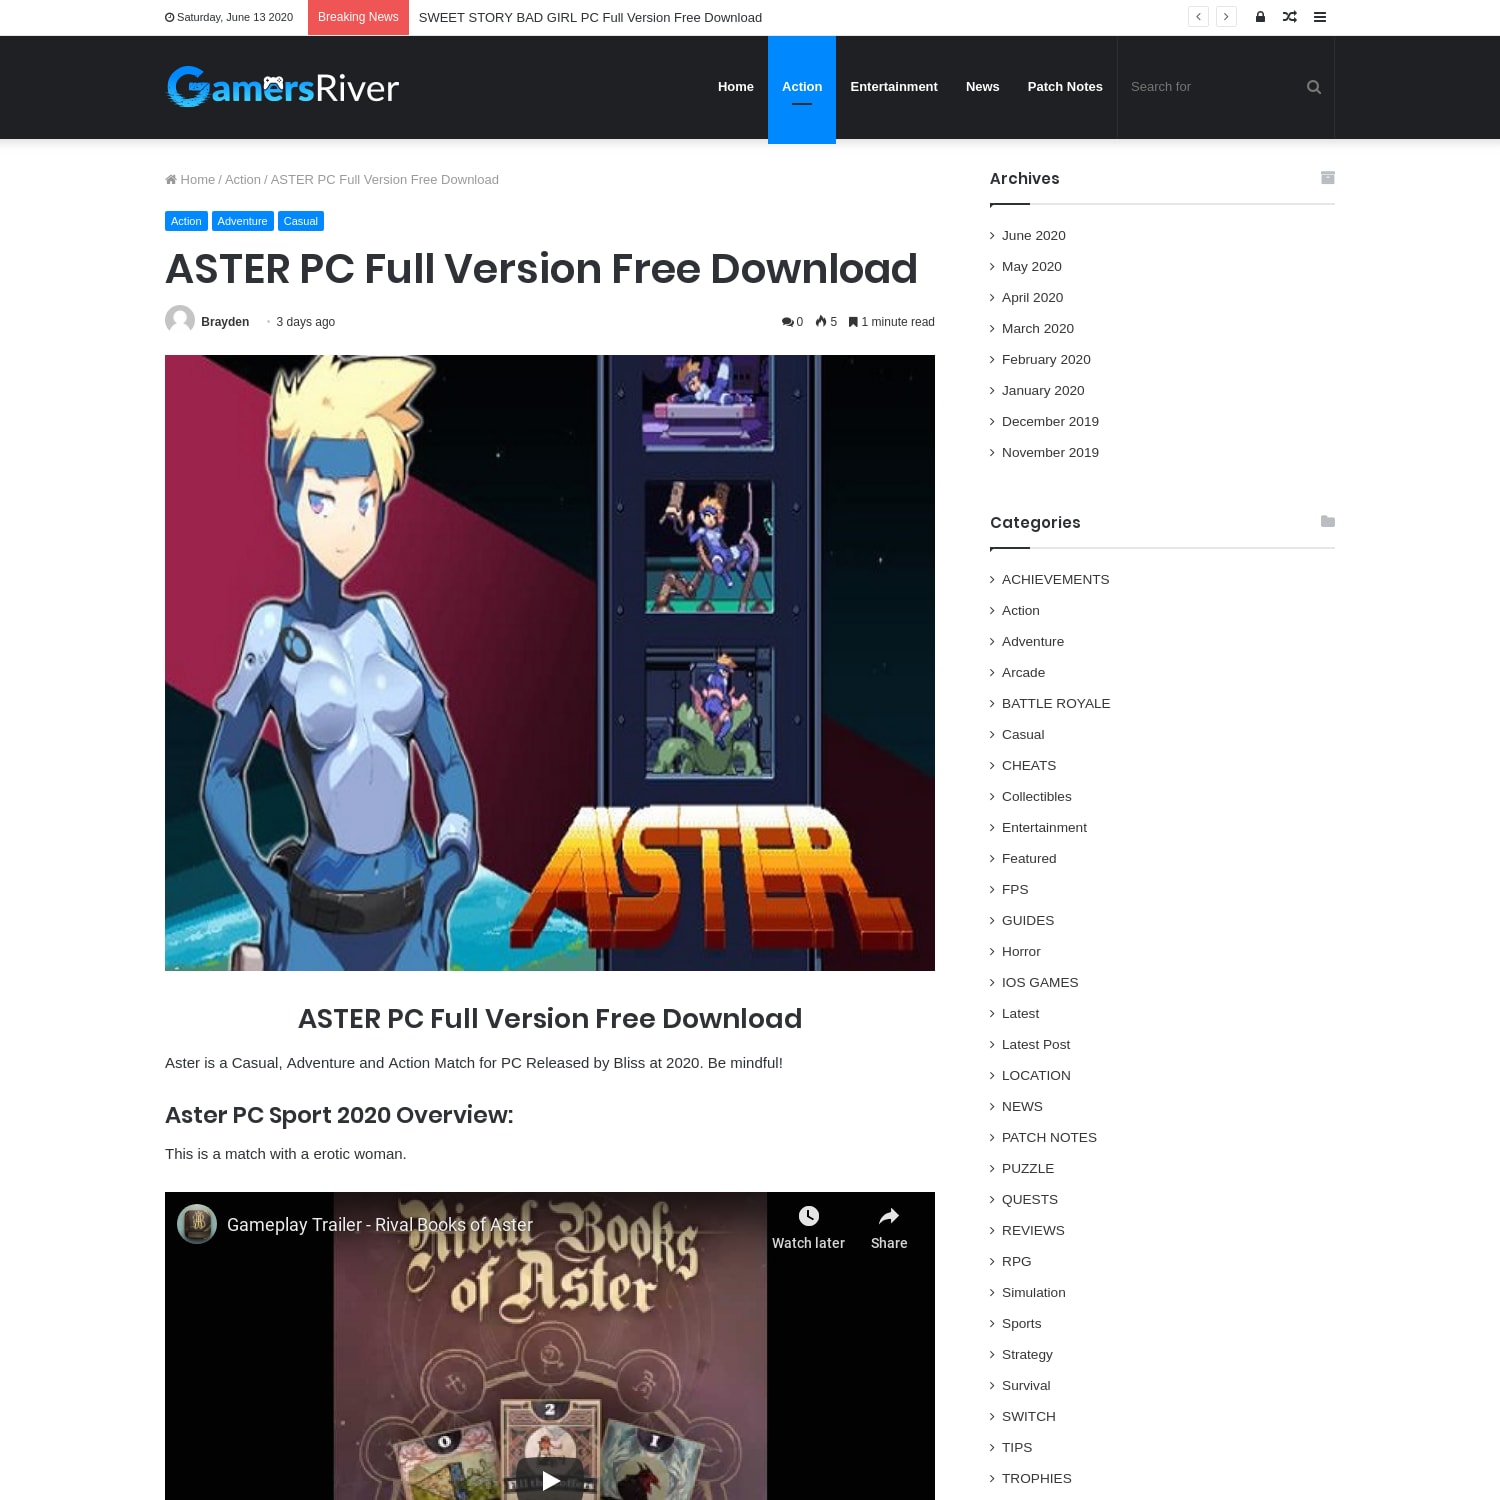 ASTER PC Full Version Free Download